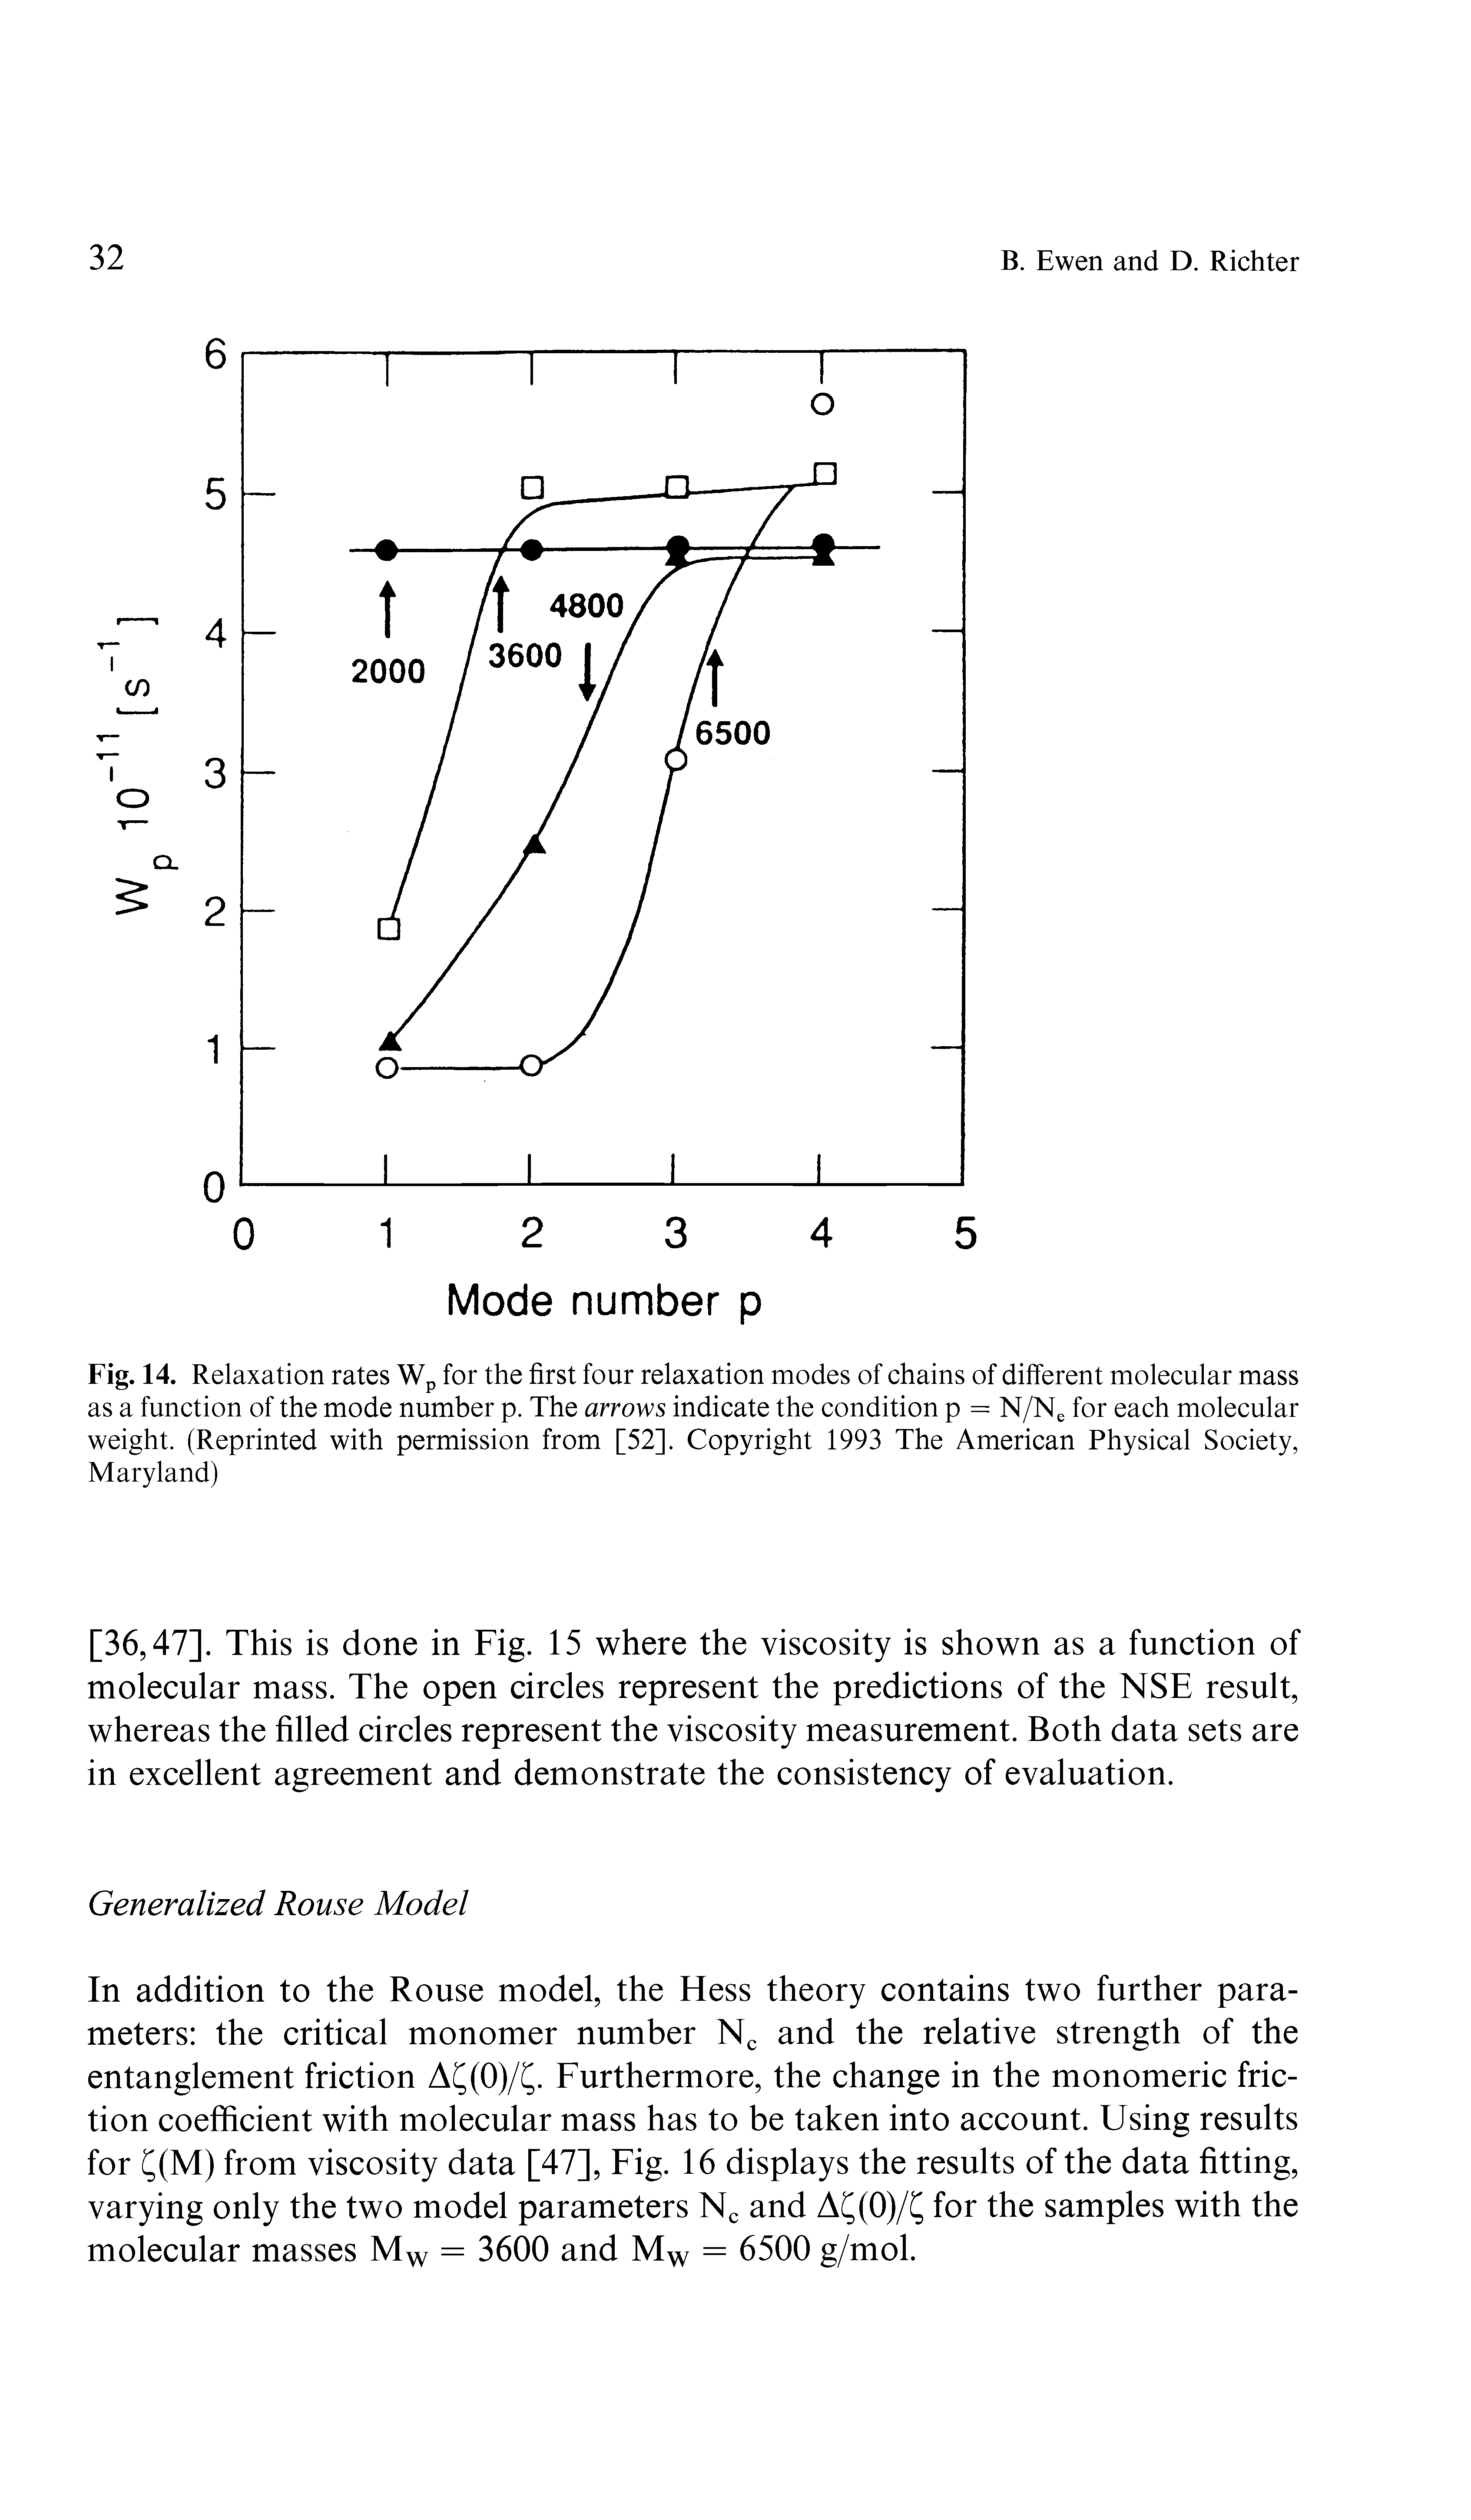 Fig. 14. Relaxation rates Wp for the first four relaxation modes of chains of different molecular mass as a function of the mode number p. The arrows indicate the condition p = N/Ne for each molecular weight. (Reprinted with permission from [52]. Copyright 1993 The American Physical Society, Maryland)...